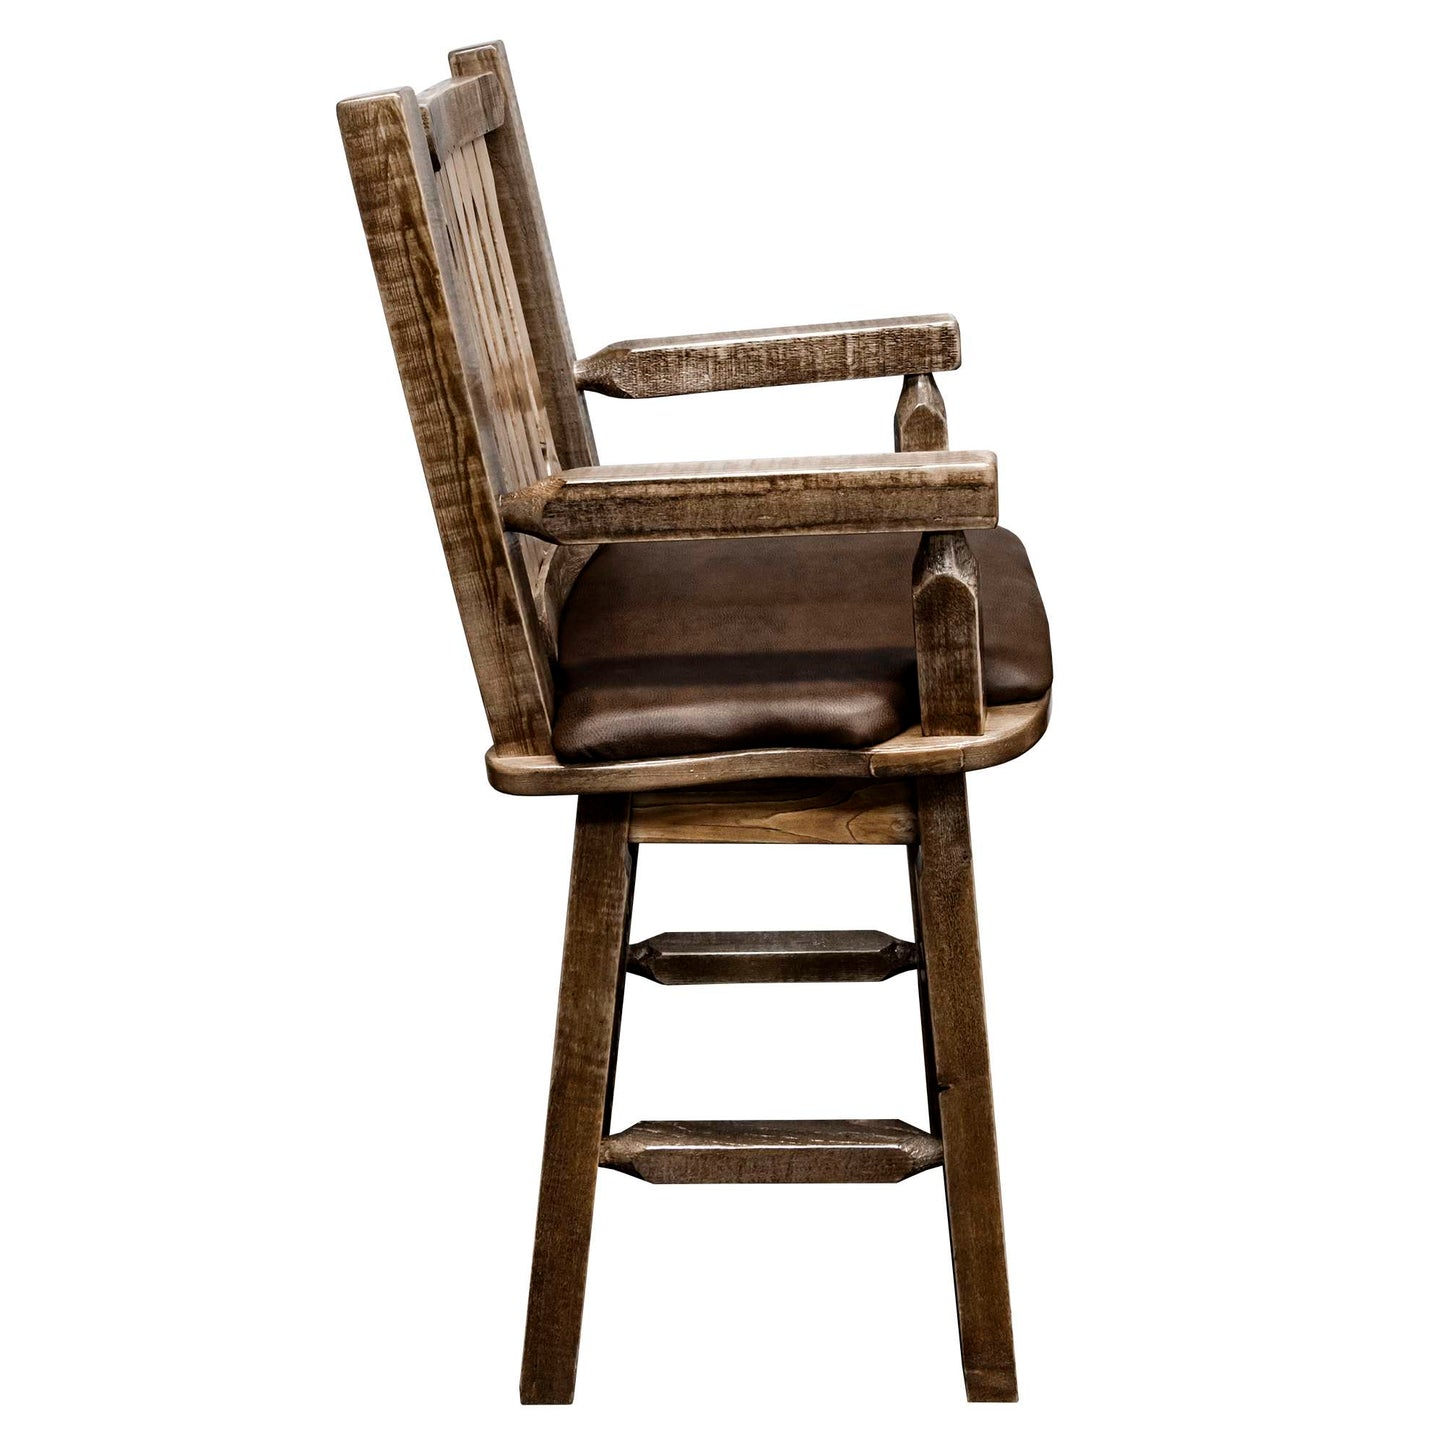 Montana Woodworks - Homestead Collection Captain's Barstool w/ Back & Swivel, Stain & Lacquer Finish w/ Upholstered Seat, Saddle Pattern - 49 in